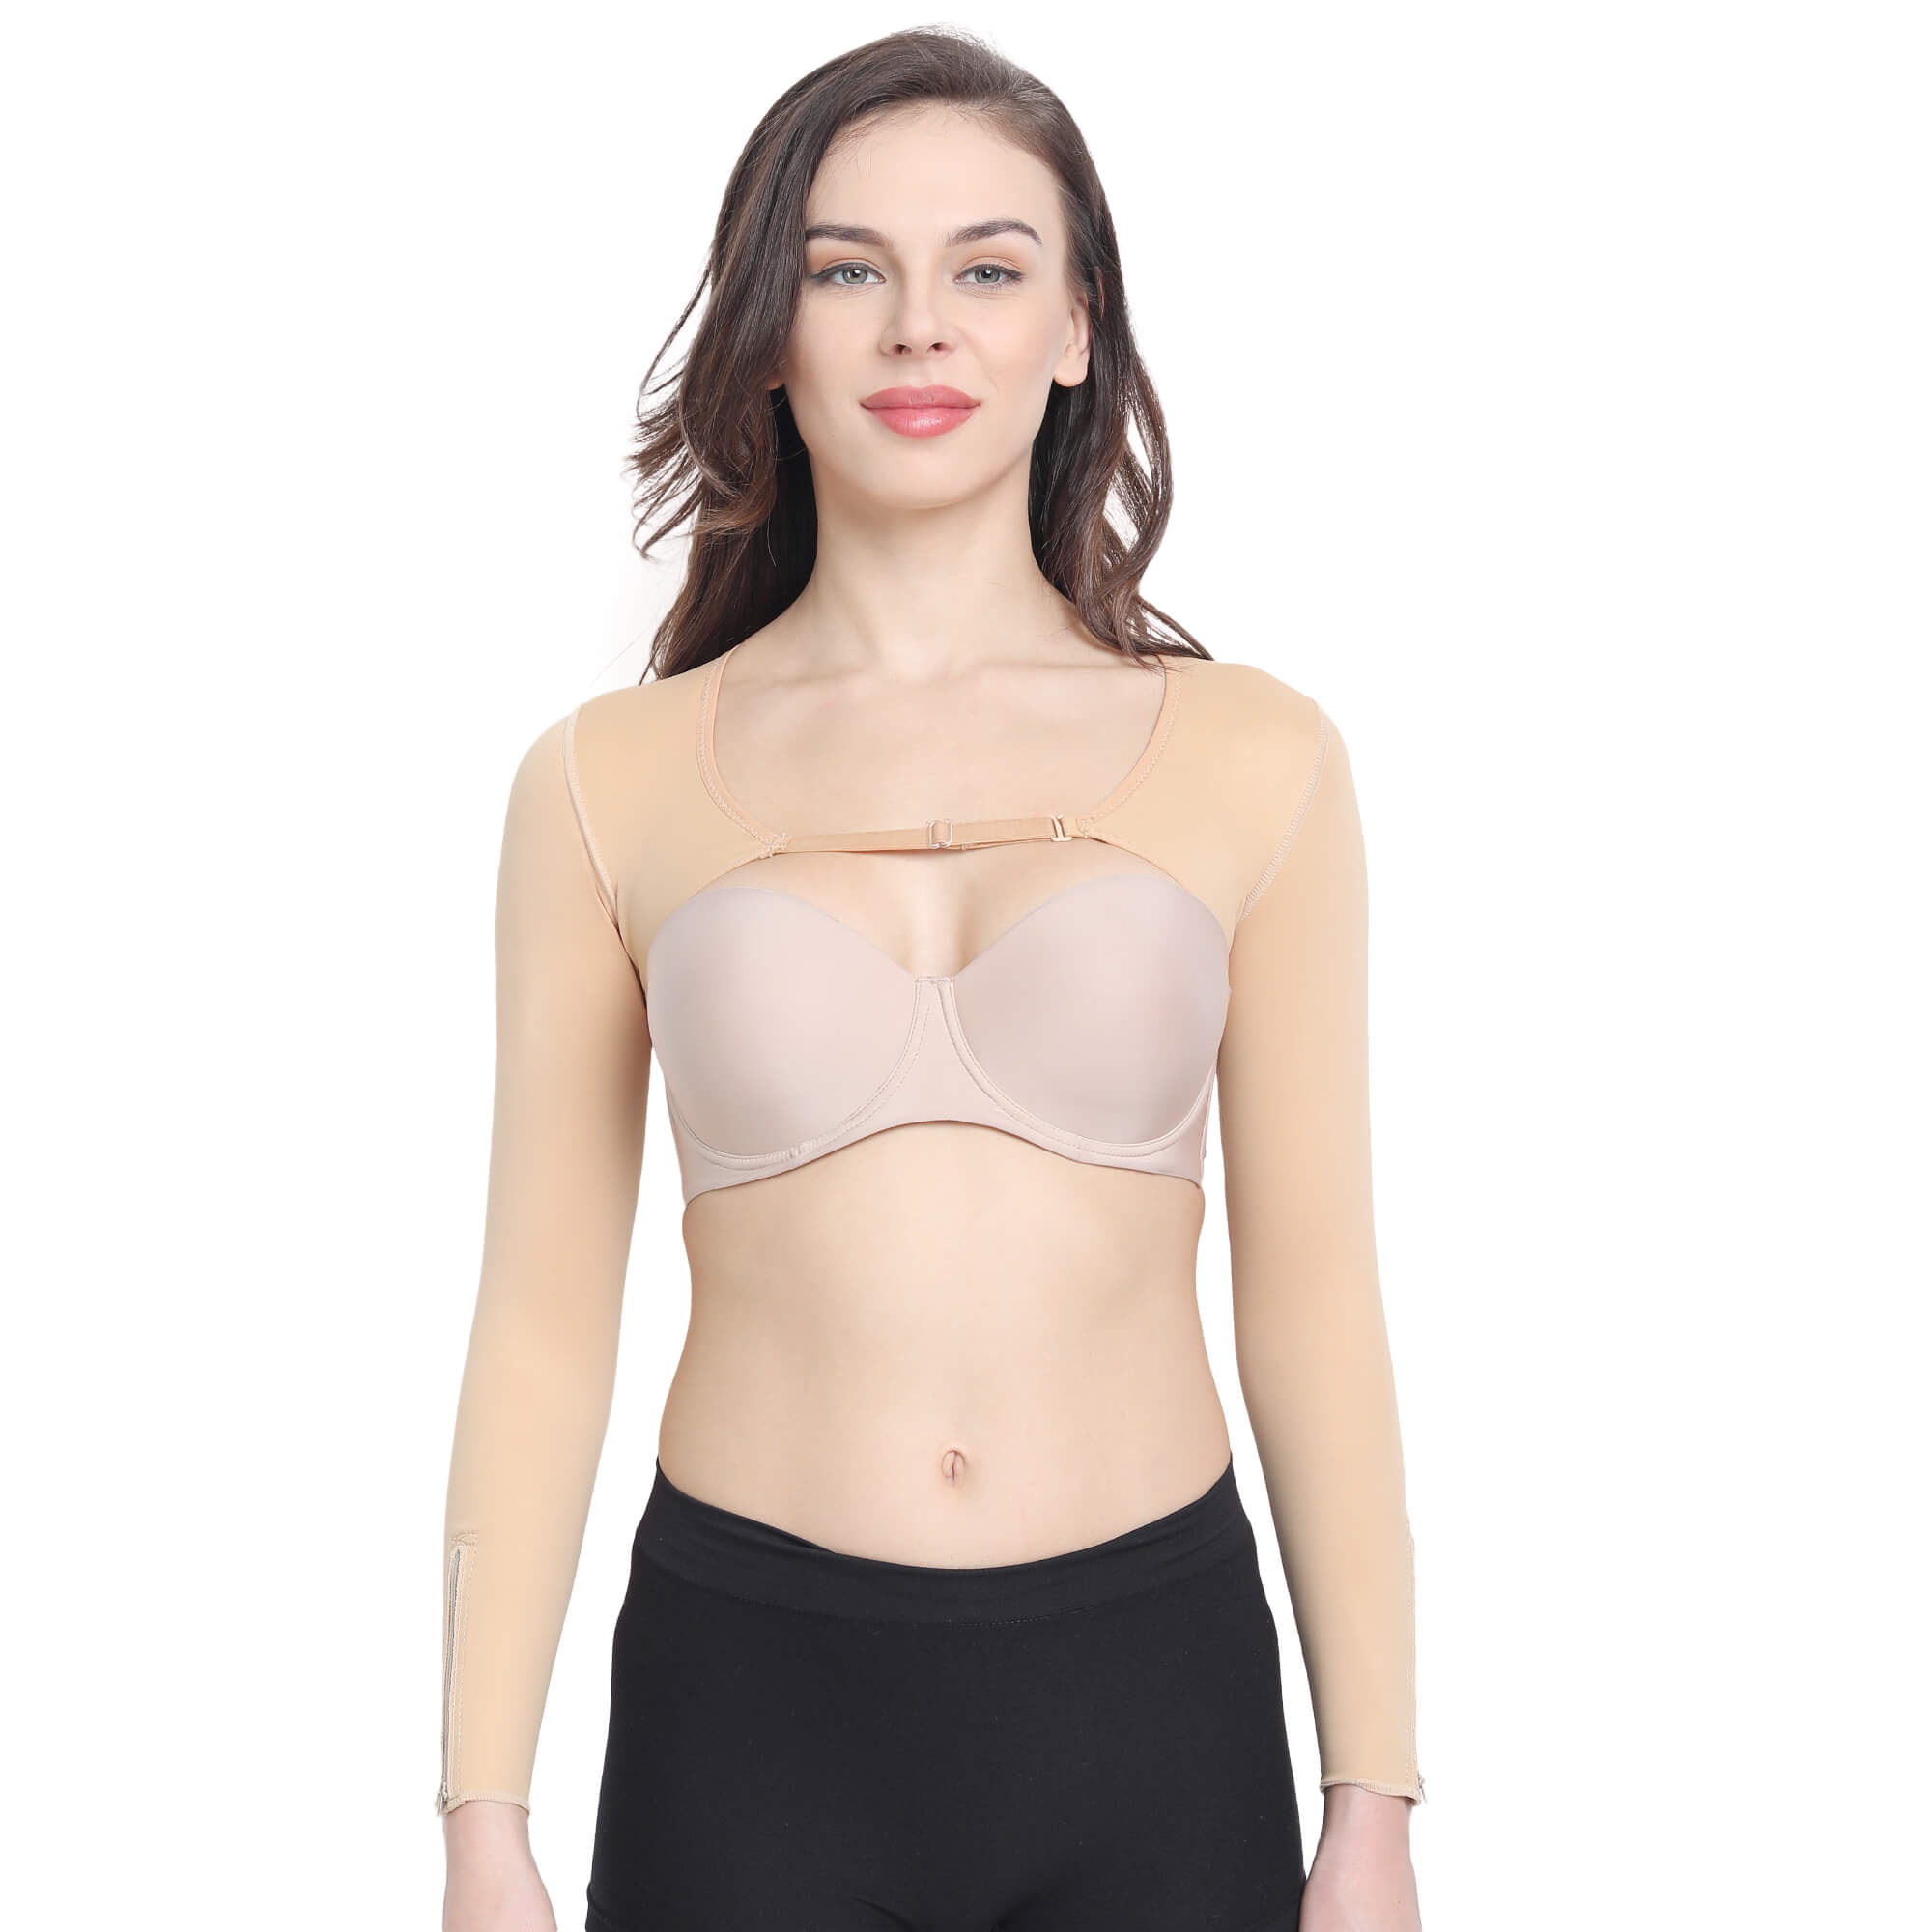 Post Surgical Arm Compression Garment - Sleeve for arm liposuction 